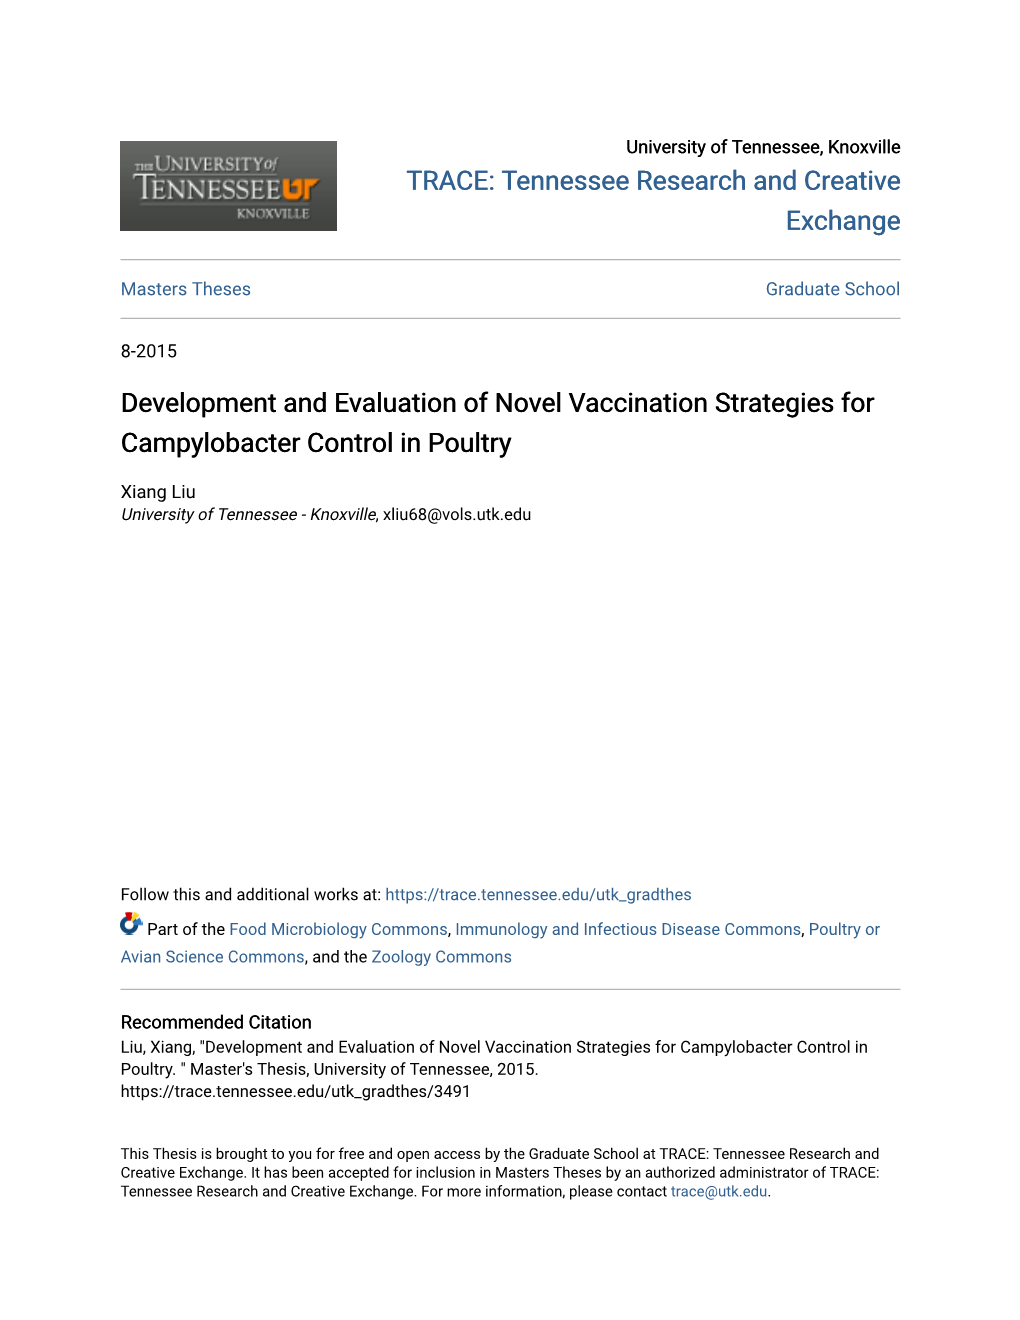 Development and Evaluation of Novel Vaccination Strategies for Campylobacter Control in Poultry